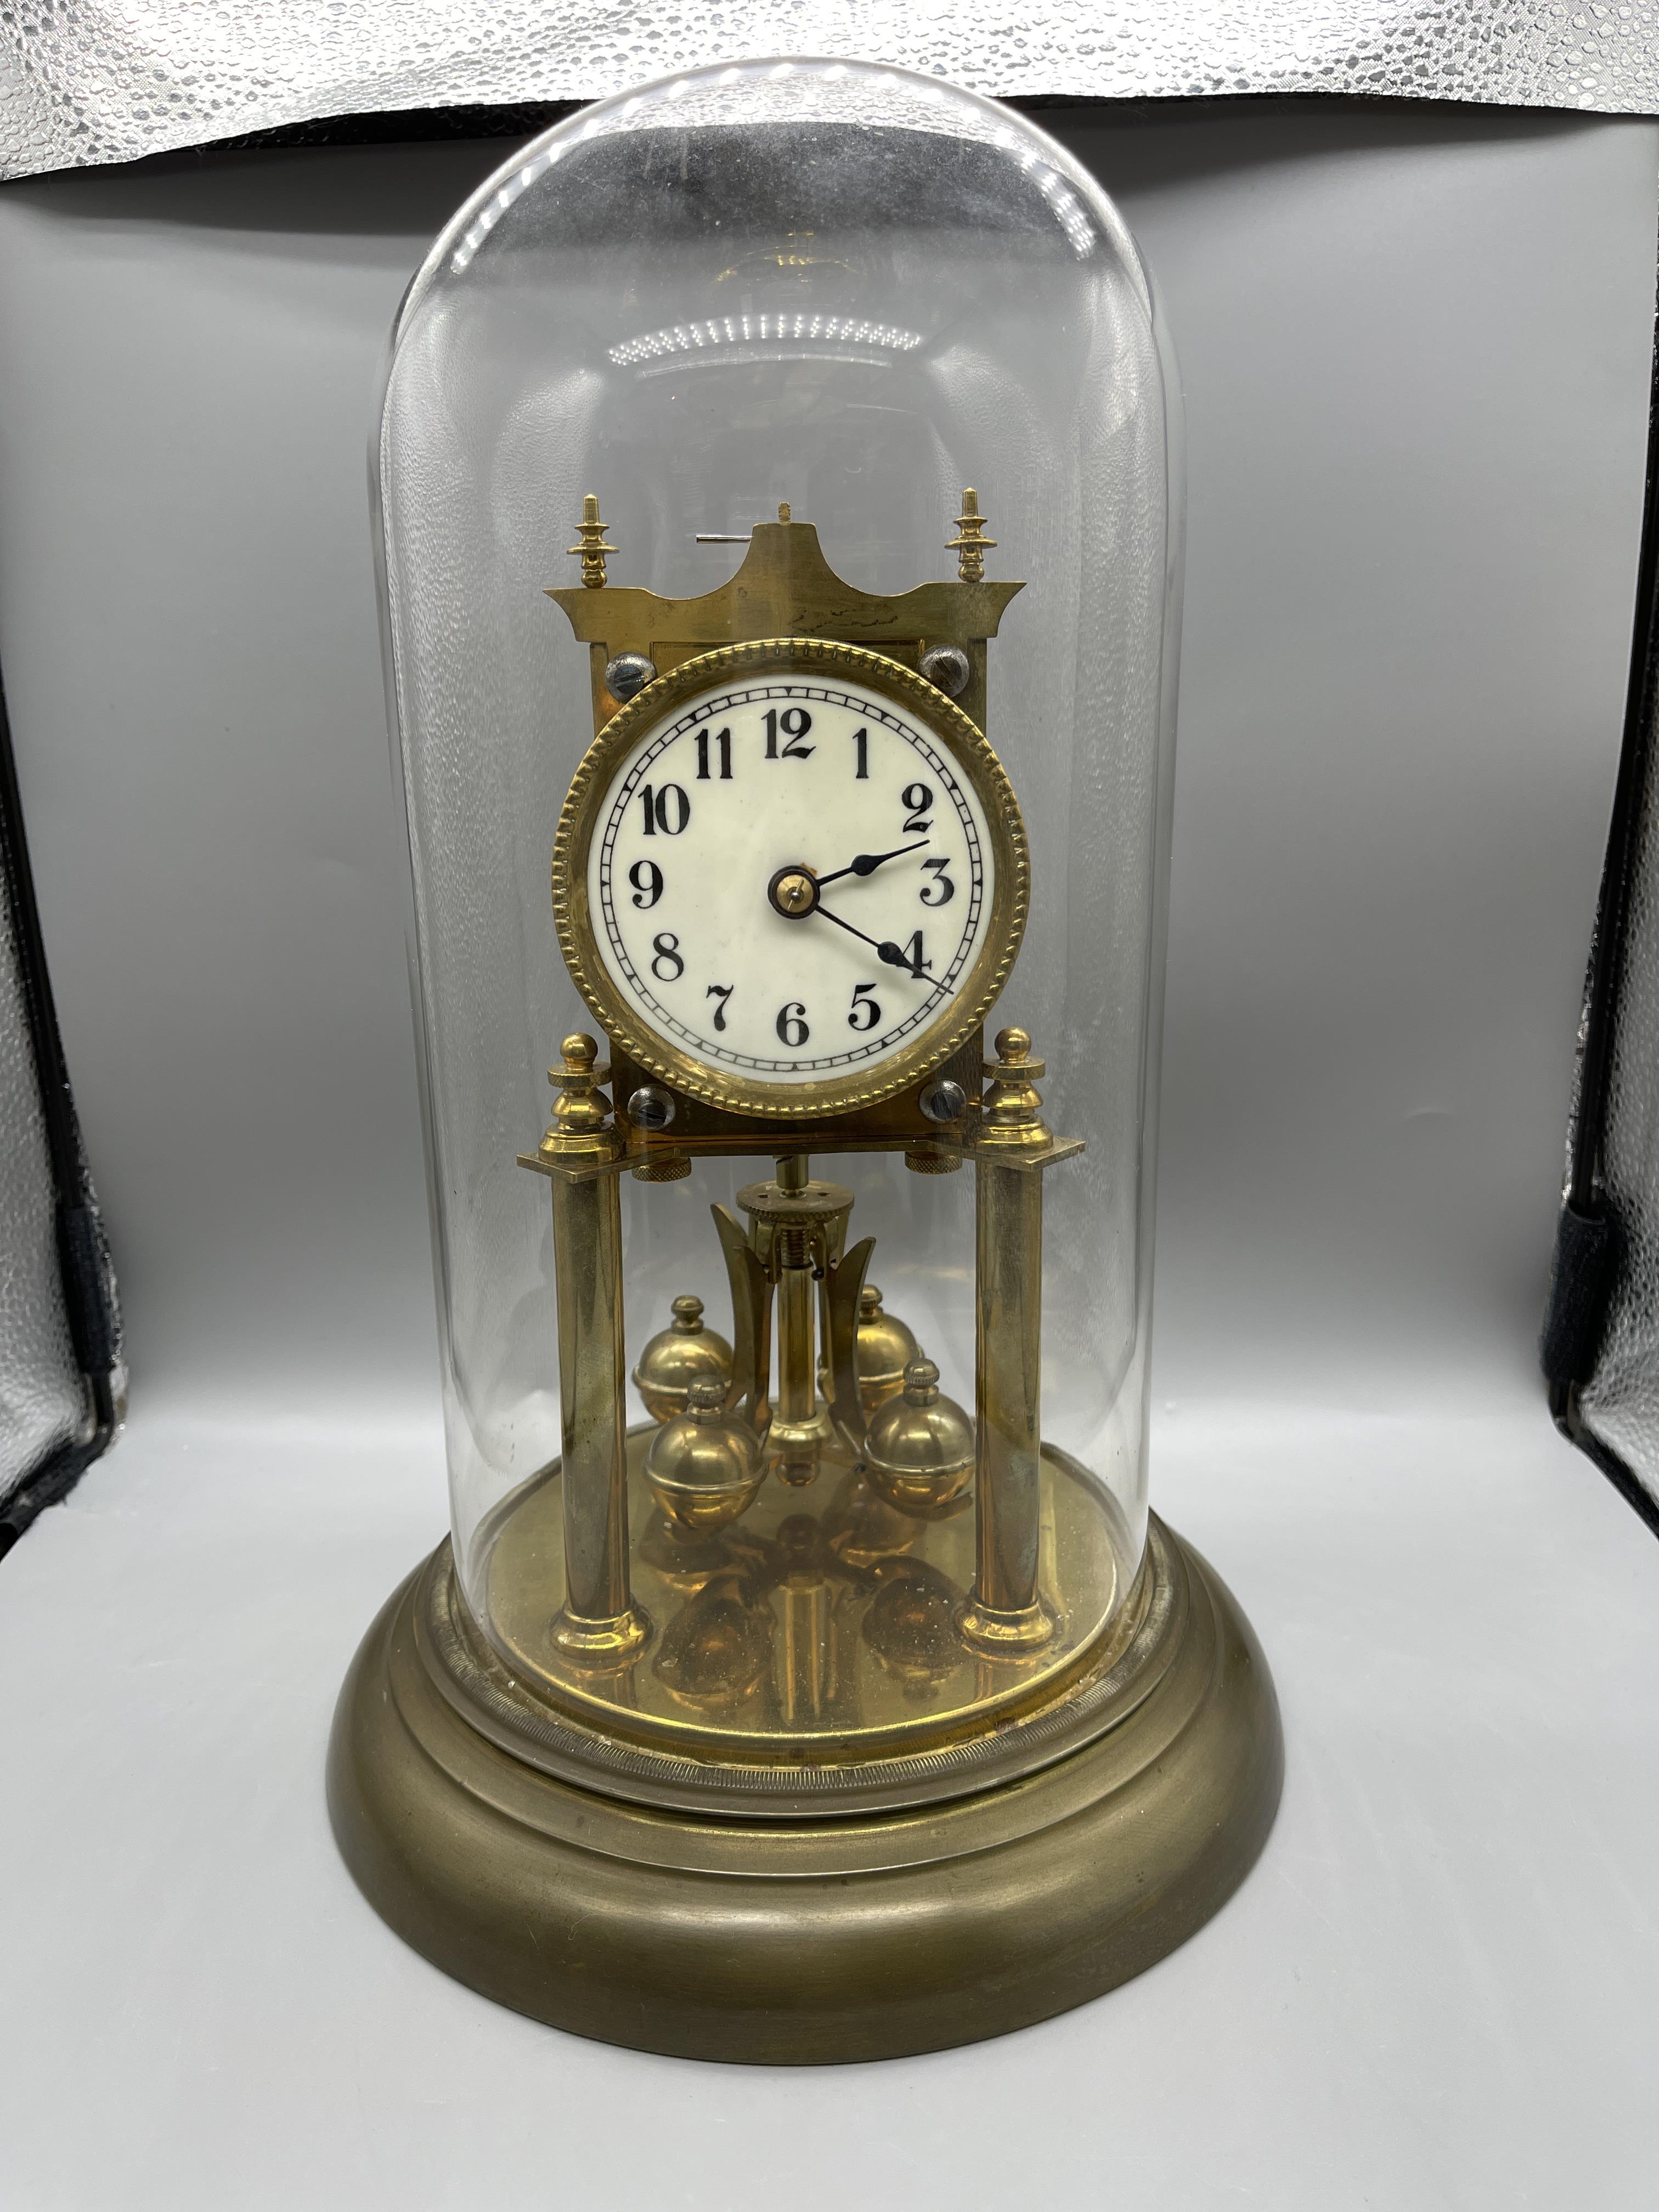 Glass Dome Clock - Image 2 of 11